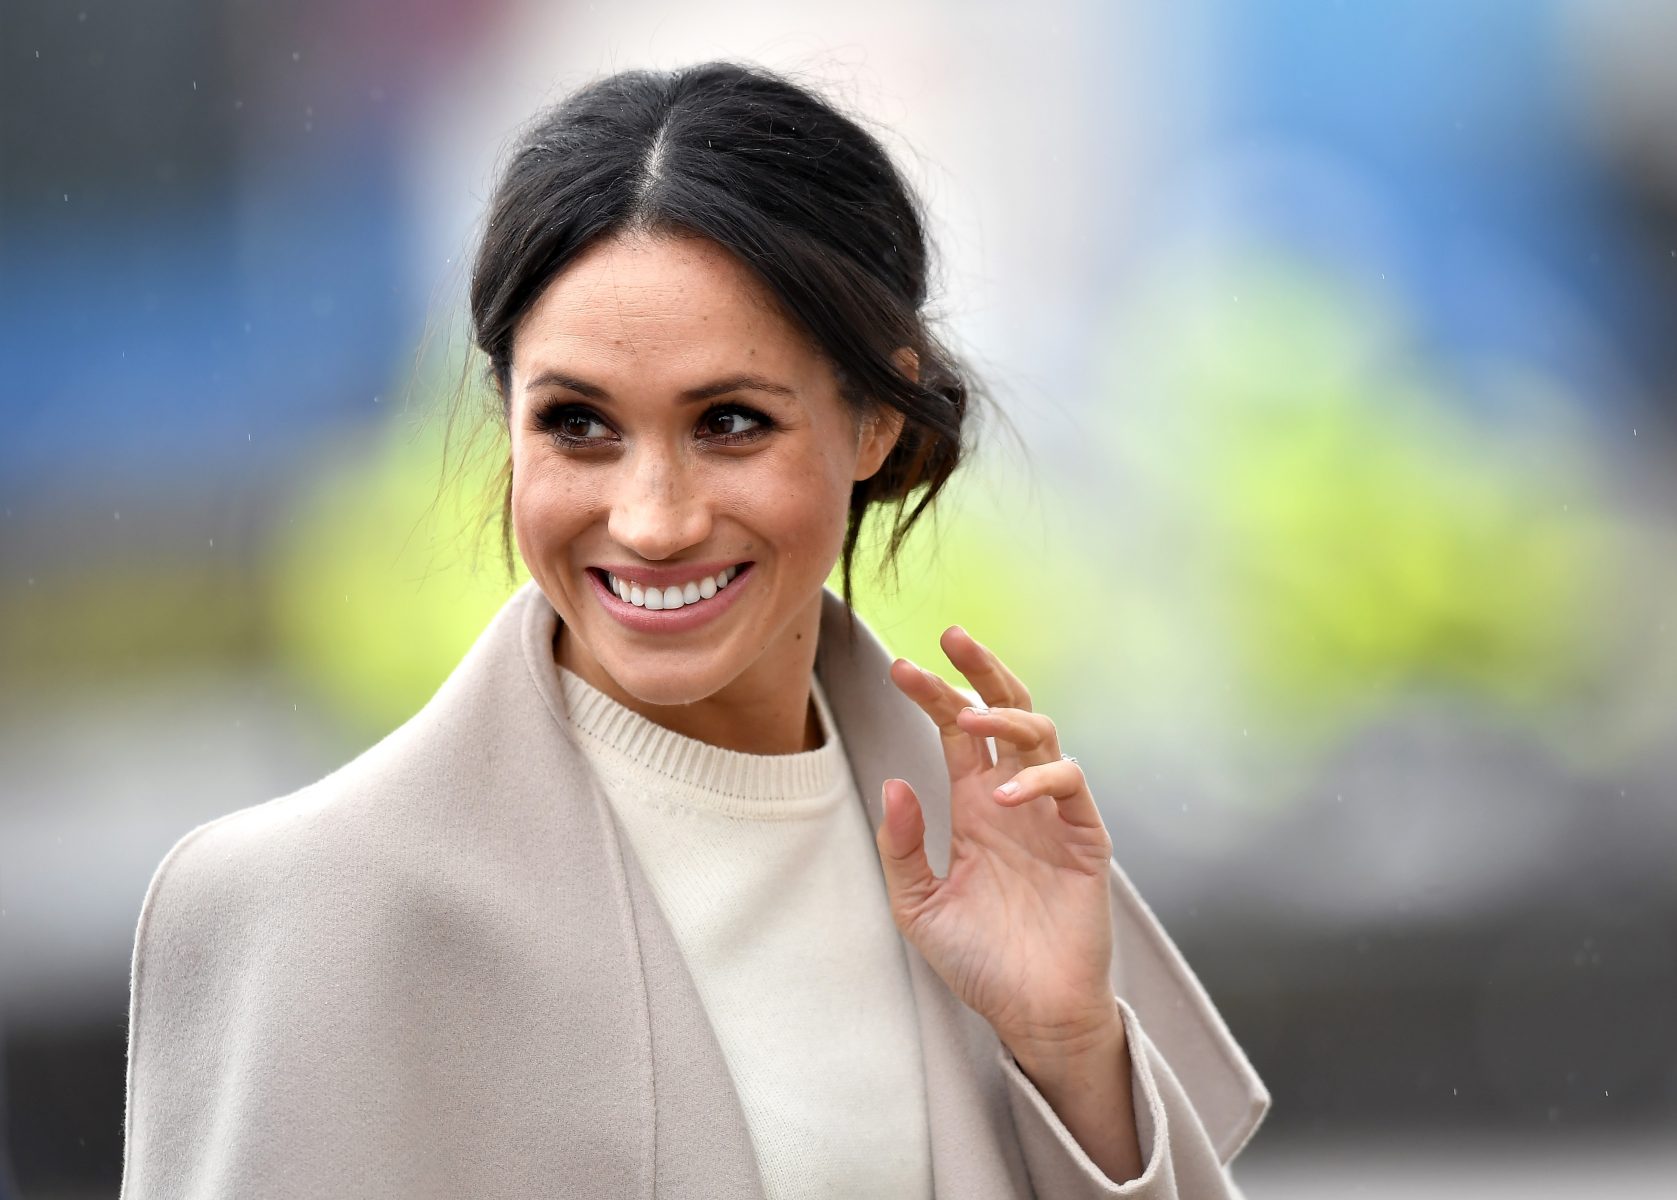 Meghan Markle's favorite beauty products